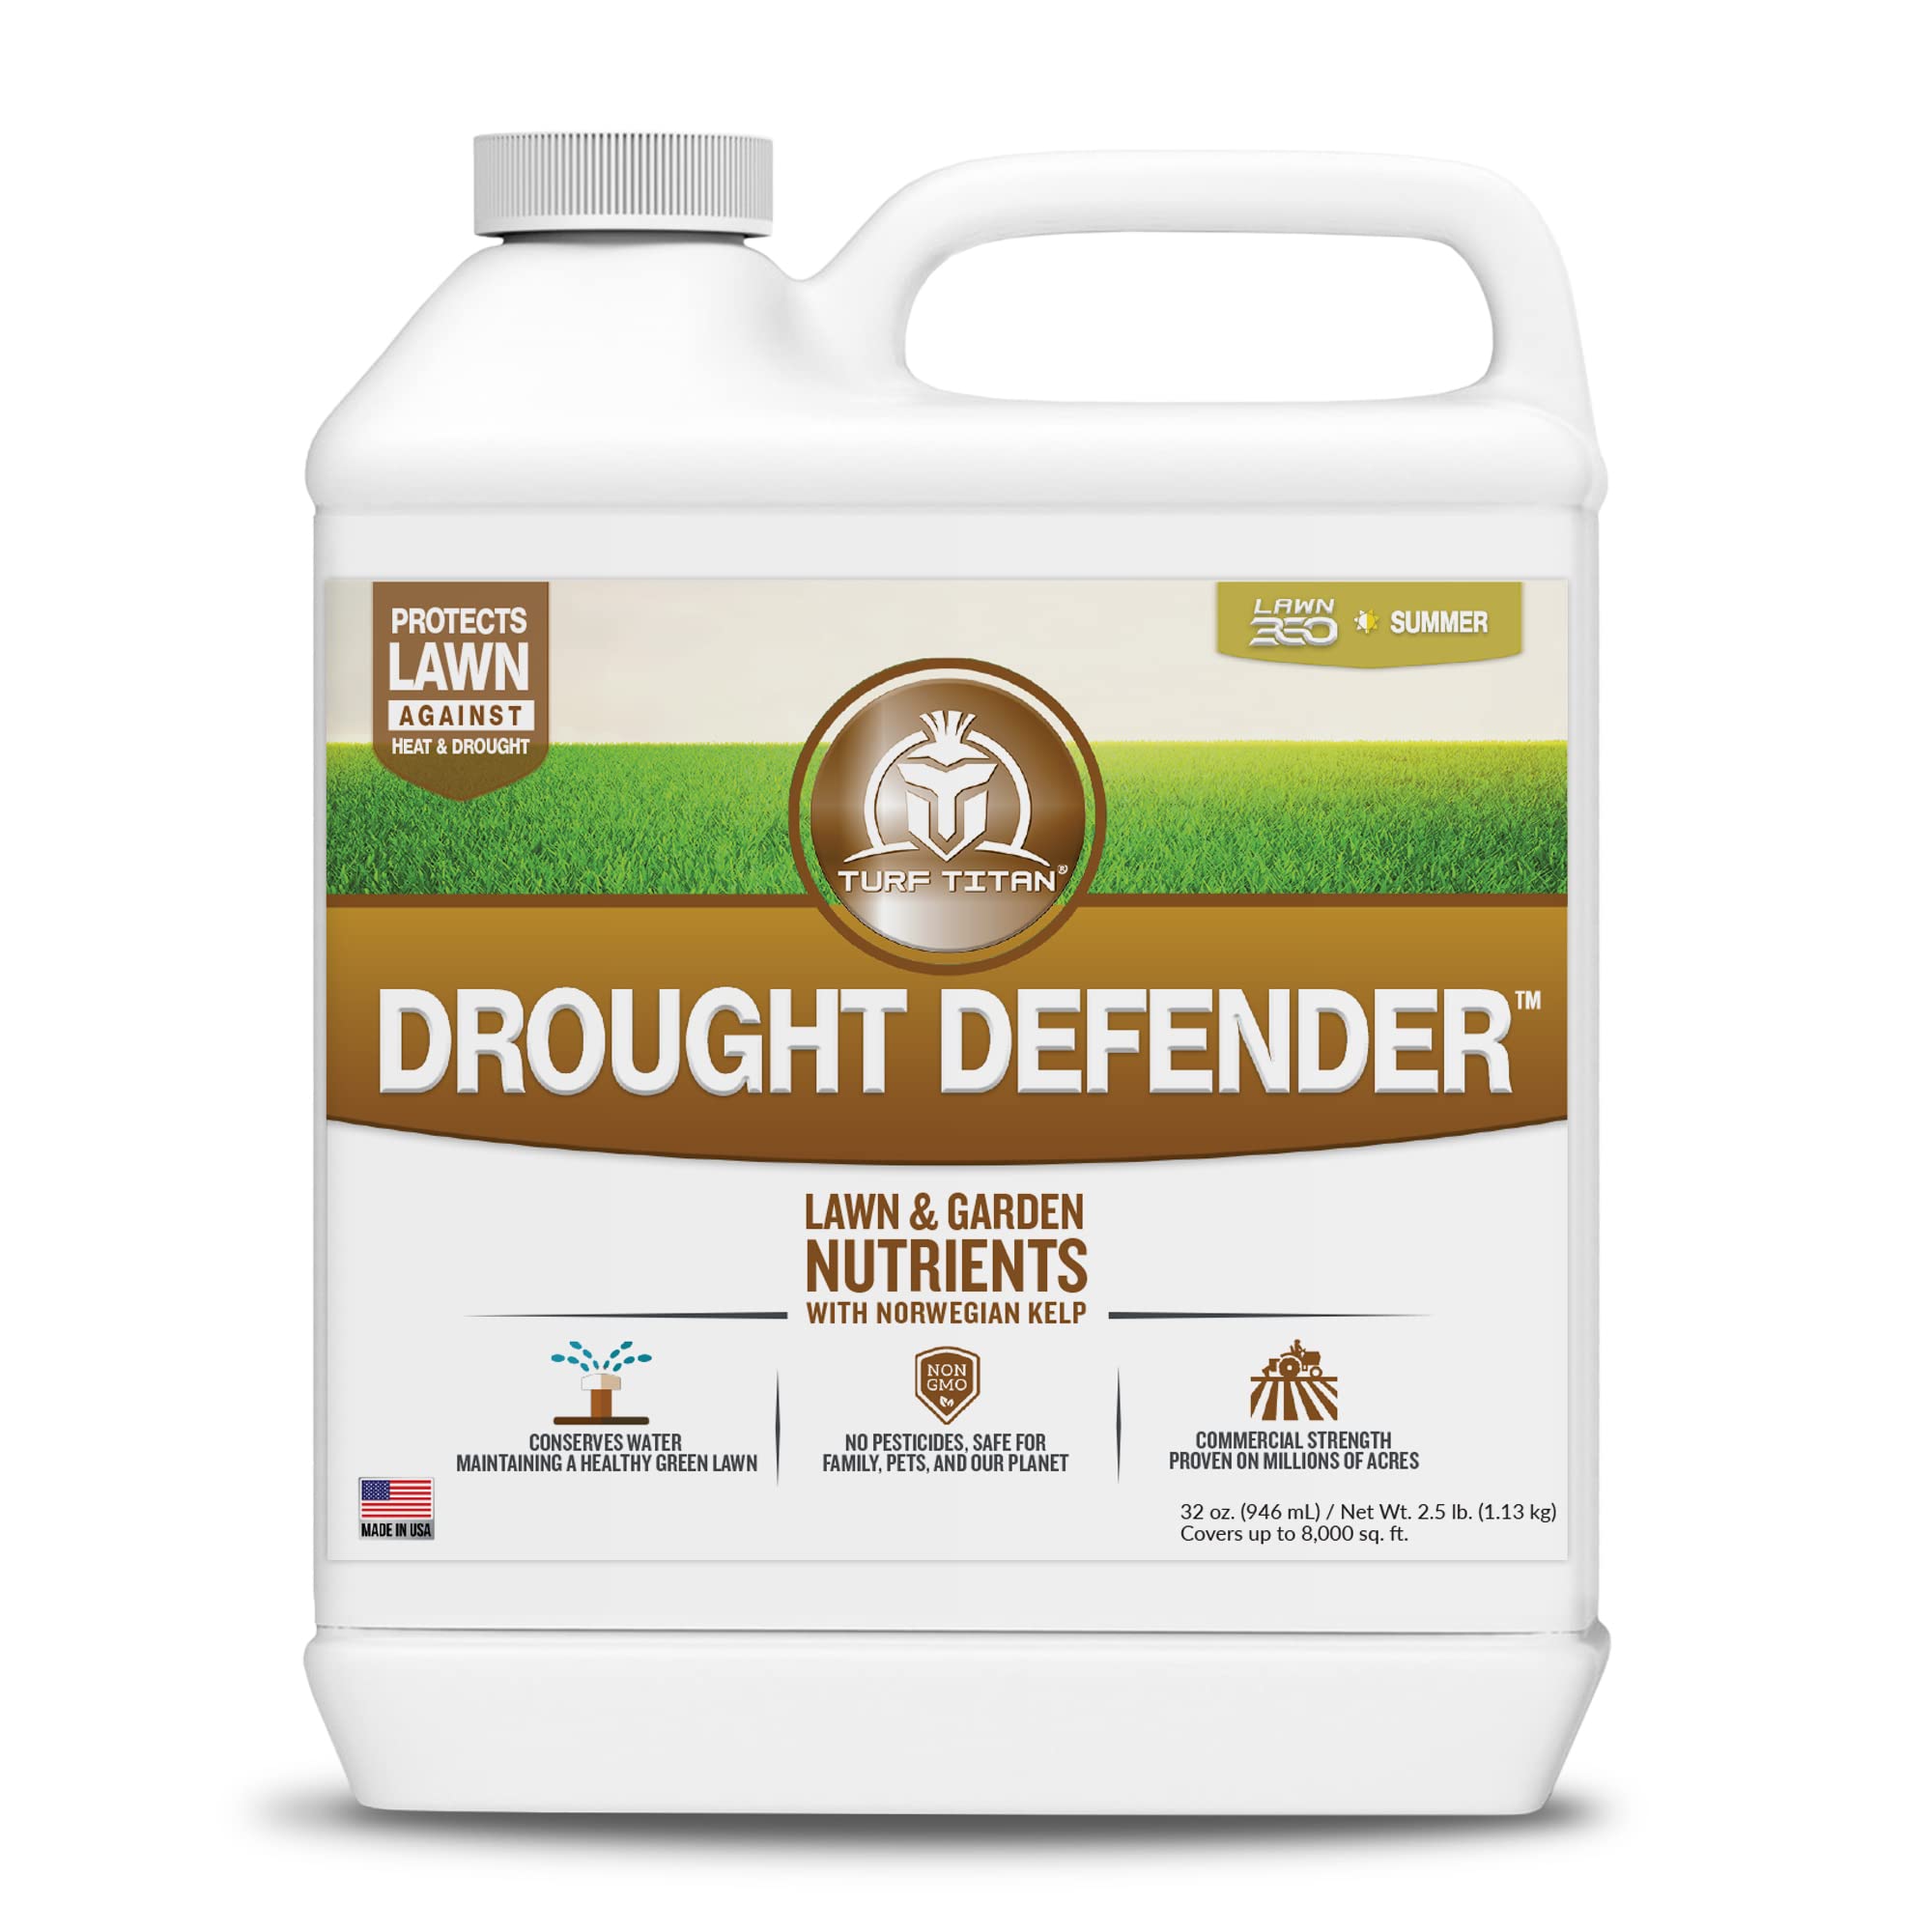 Turf Titan Lawn Advancer & Drought Defender Bundle - Made in The USA, Early Summer Lawn Fertilizer with Norwegian Kelp Extract, Nitrogen, Soluble Potash, Boron, Manganese, and Zinc, Non-GMO, 32 oz